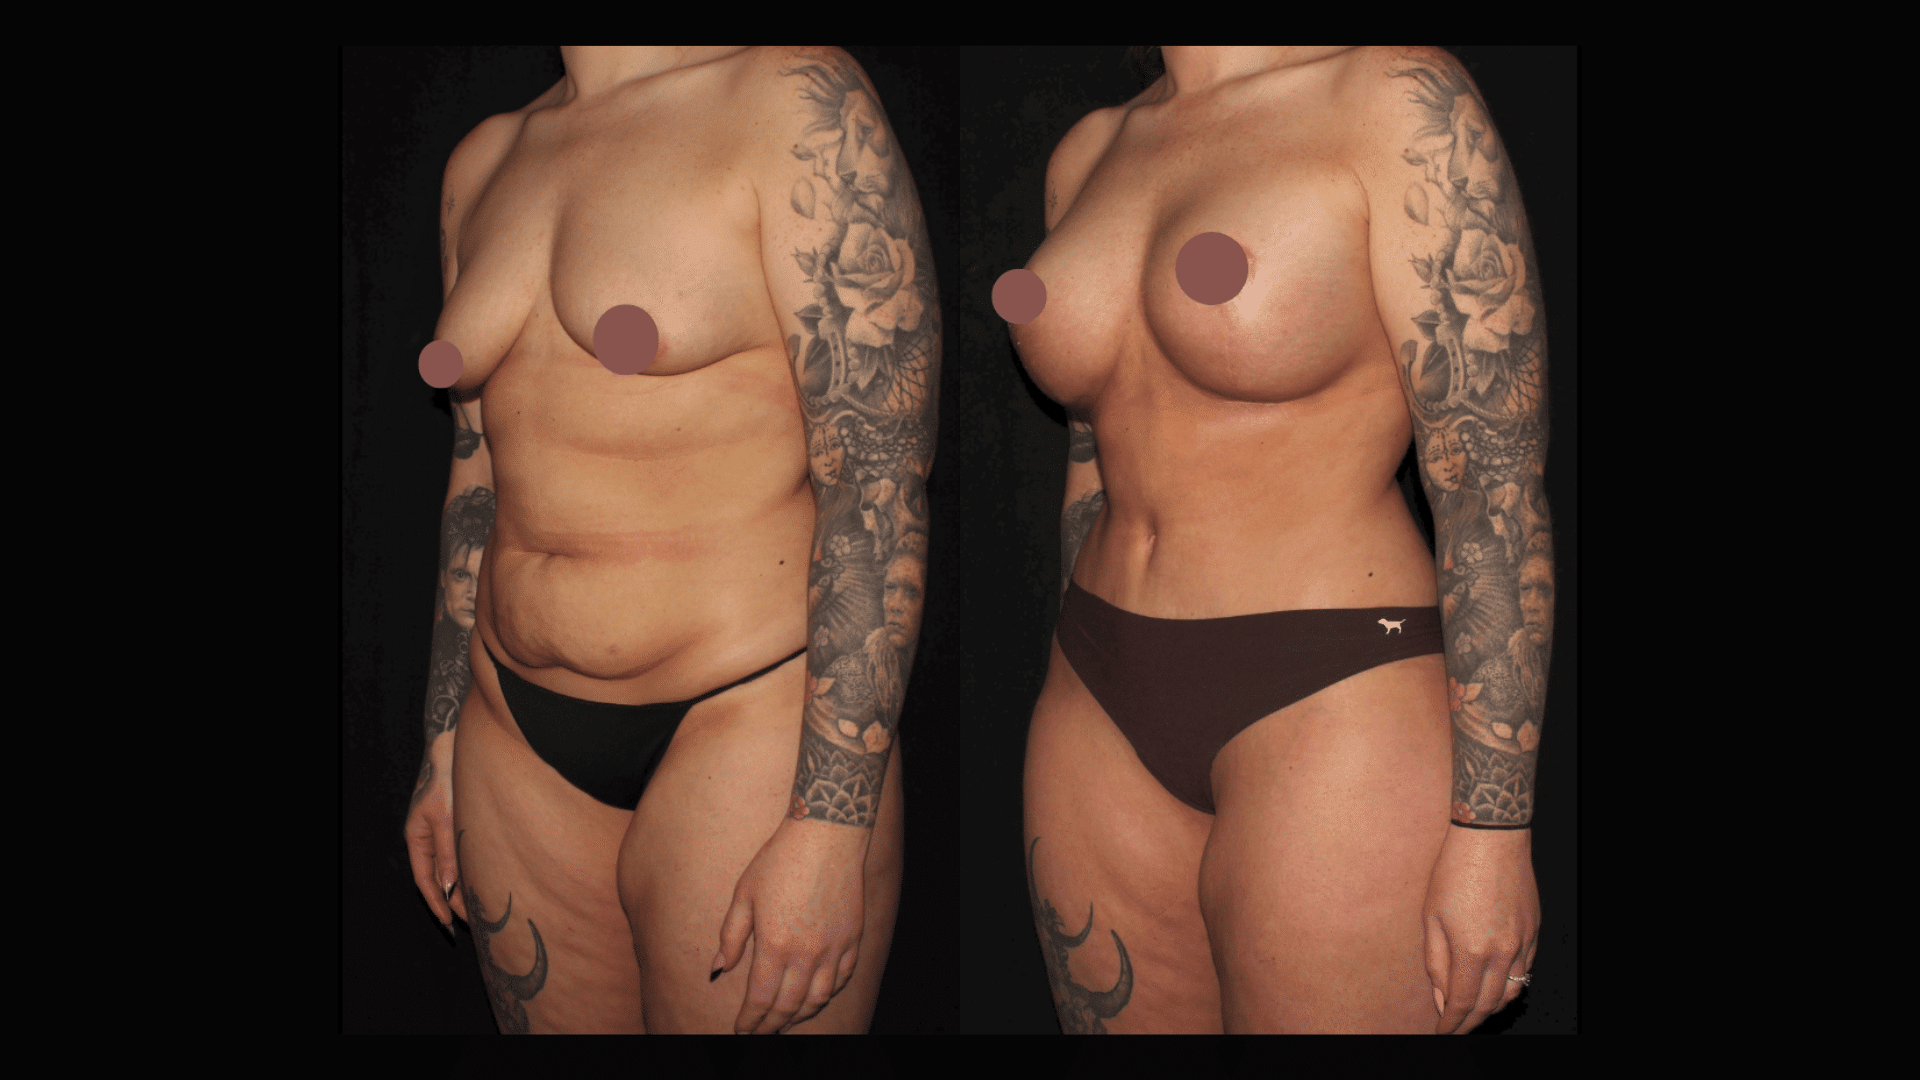 Mommy Makeover: Breast Augmentation + Tummy Tuck at Silk Touch Cosmetic Surgery & Medspa